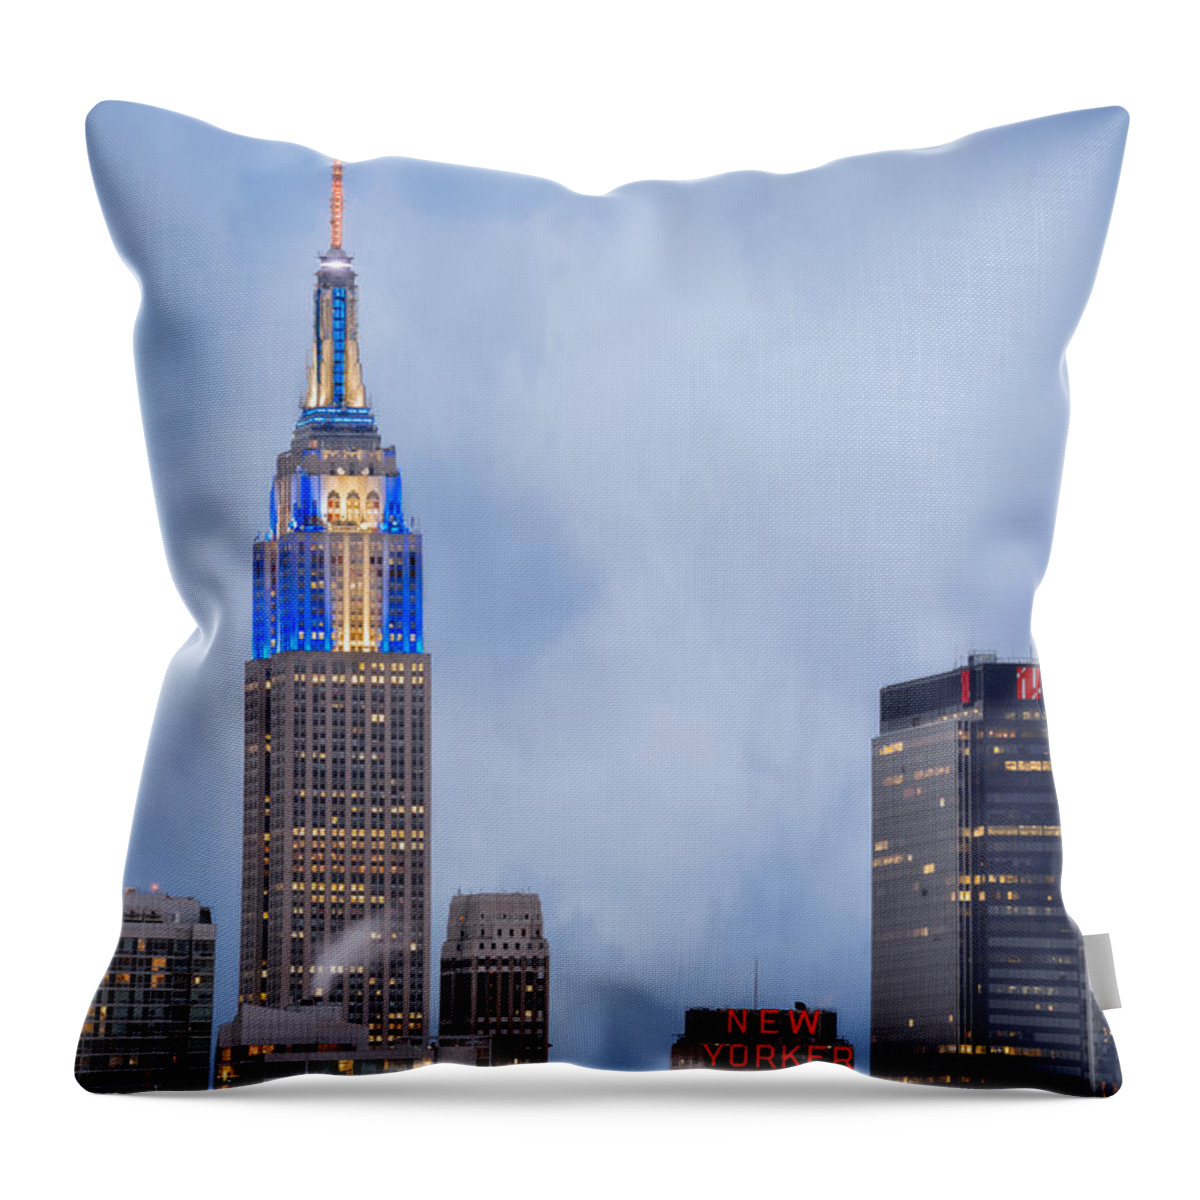 2014 Throw Pillow featuring the photograph Days of Hanukkah in New York City by Eduard Moldoveanu